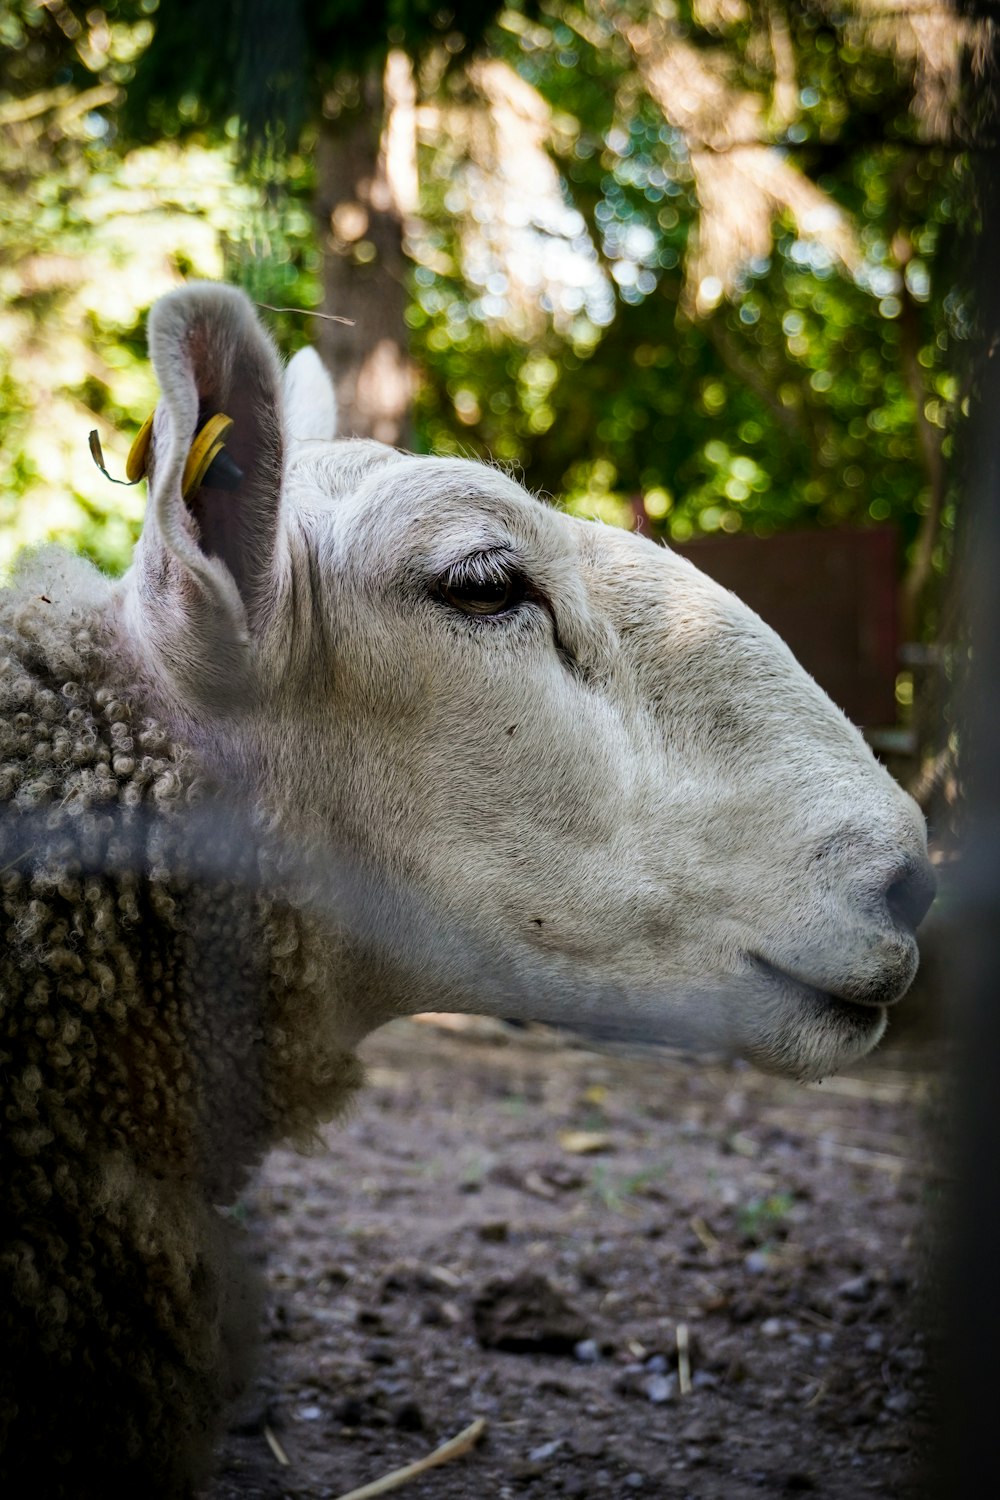 a close up of a sheep behind a fence